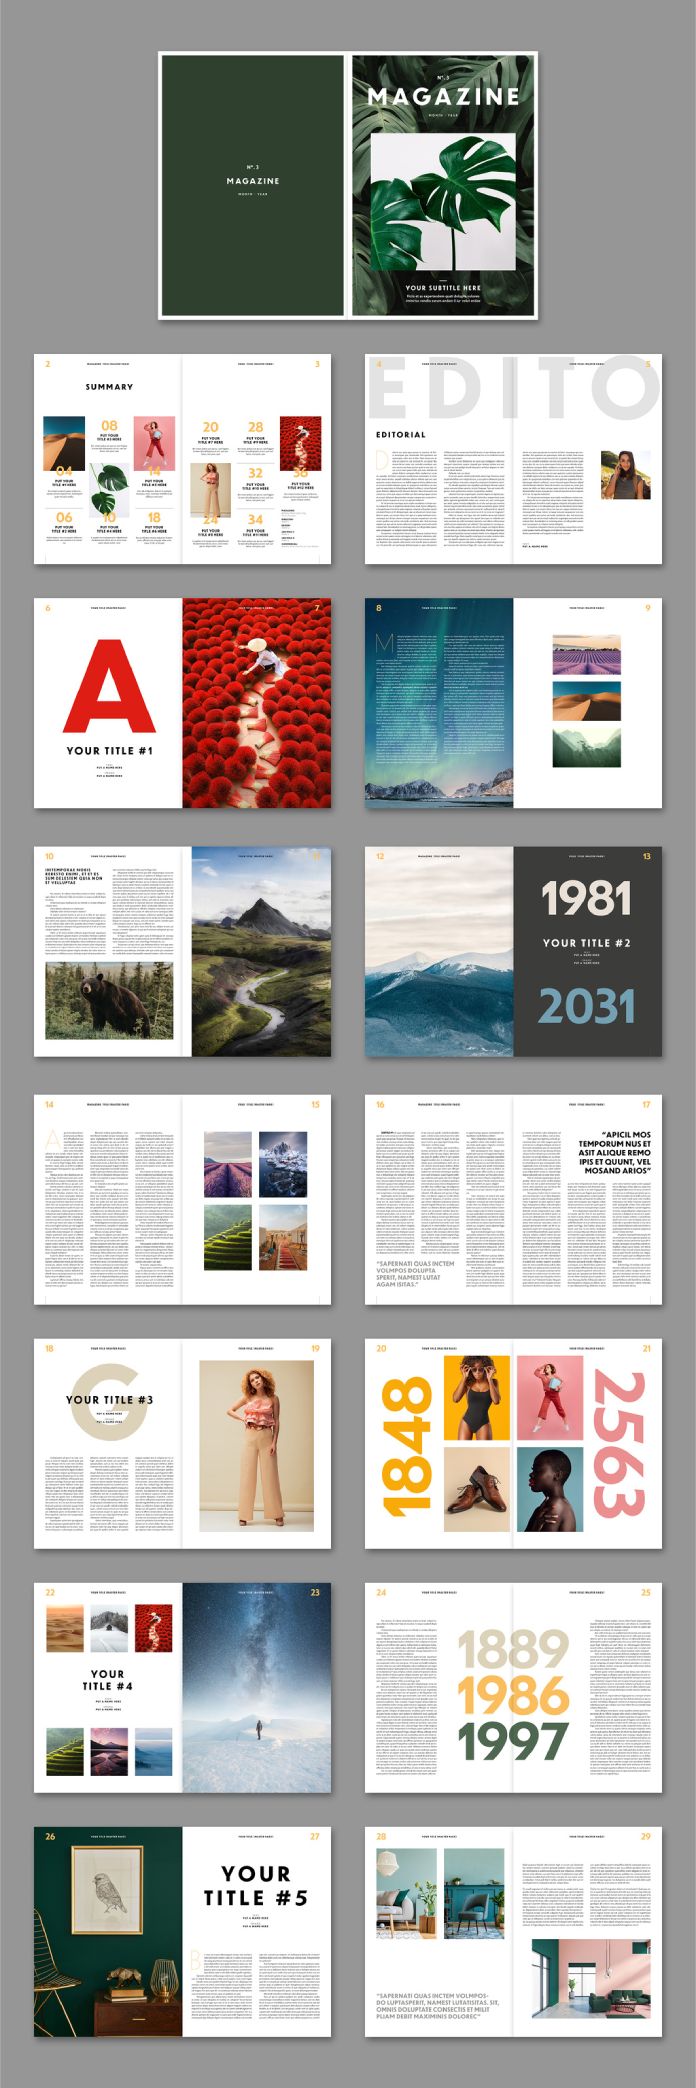 A Colorful and Fully Customizable Magazine Template for Adobe InDesign